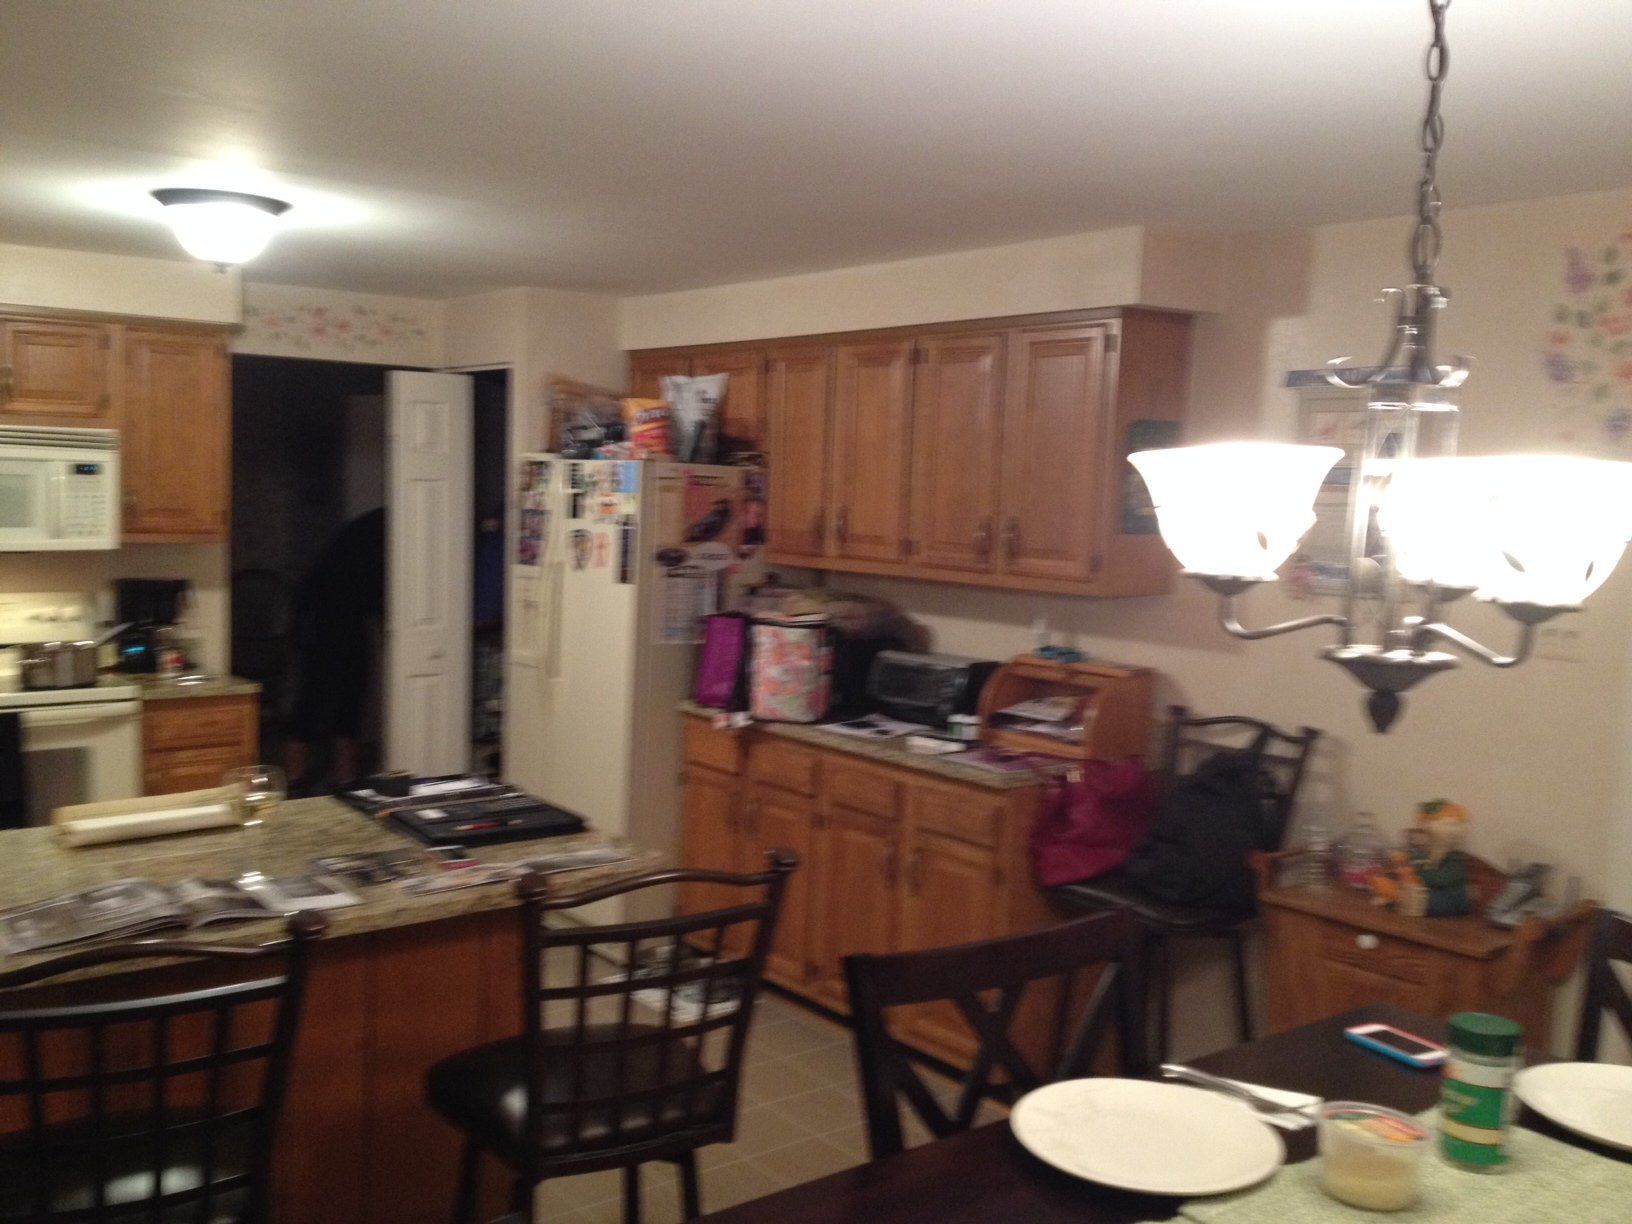 Kitchen and Dining Room - Home Improvement Services in Glen Arm, MD